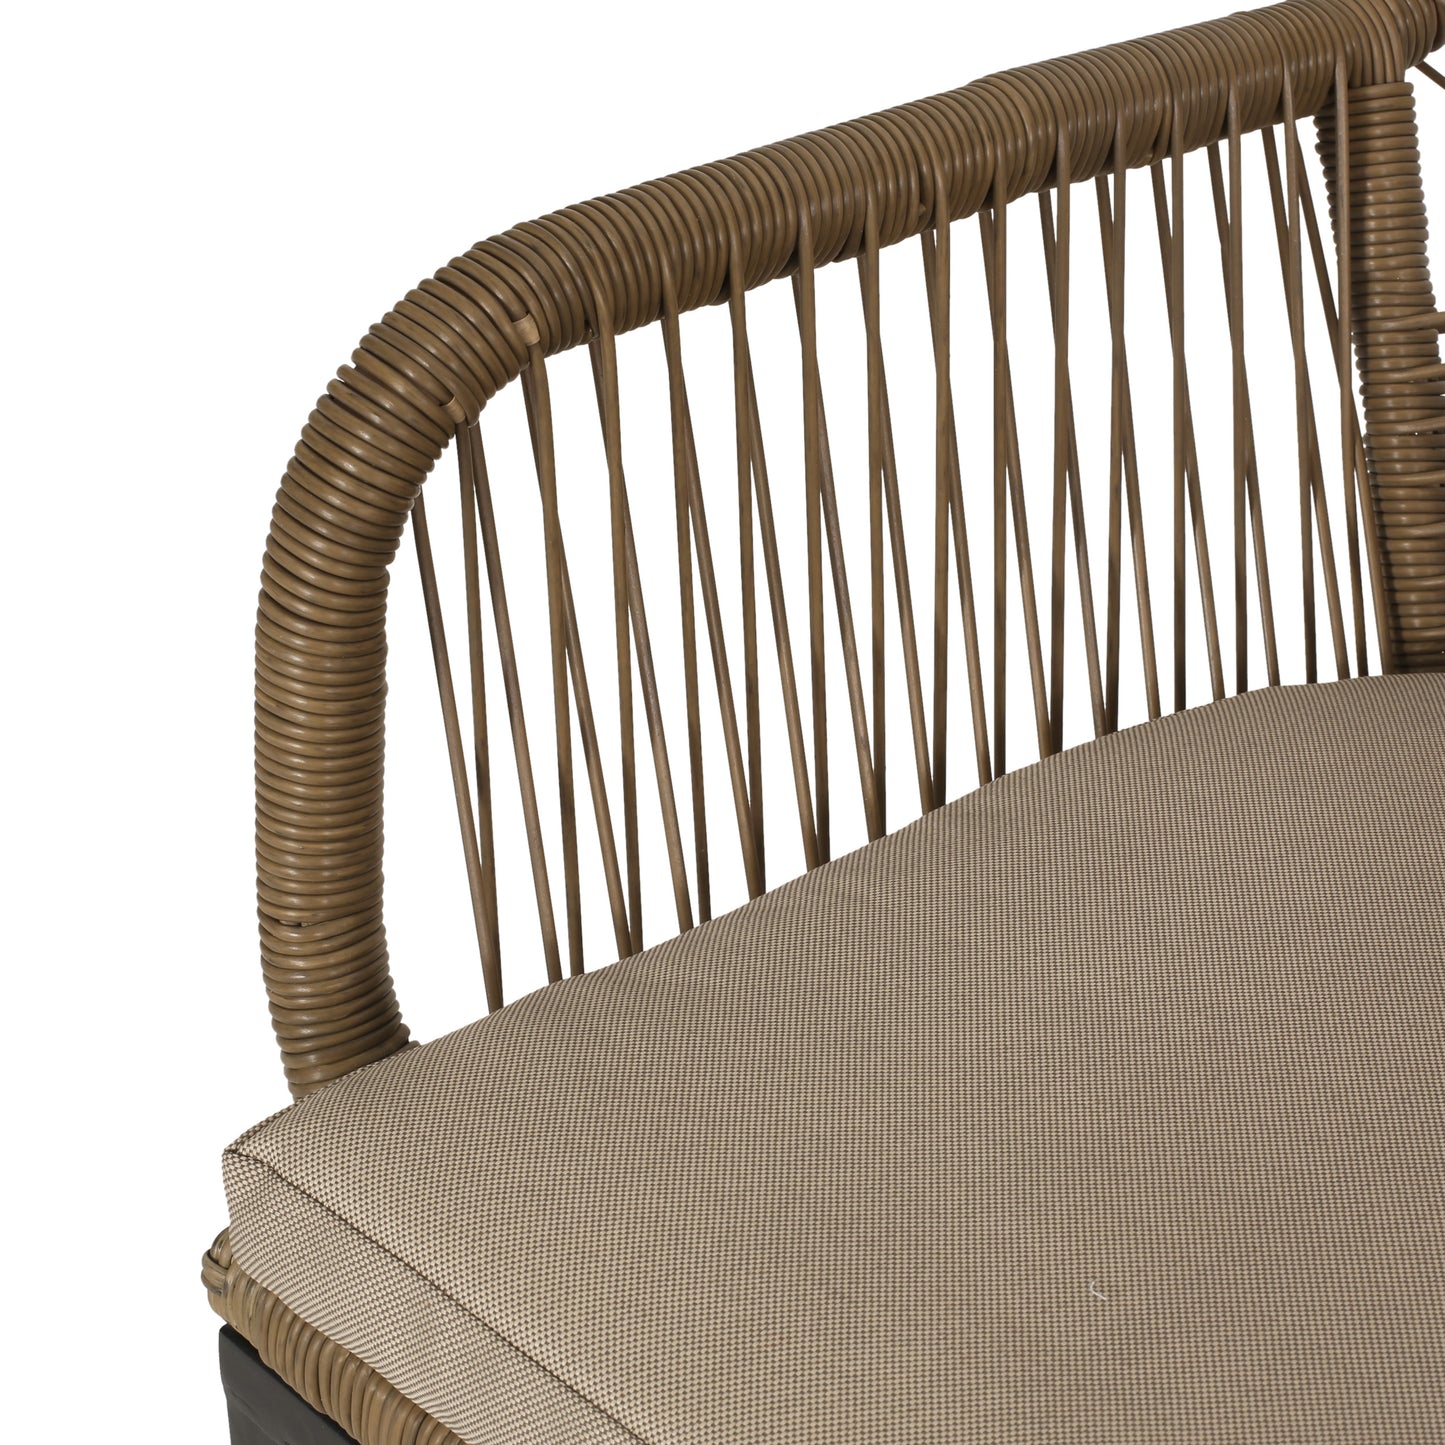 Fromberg Outdoor Wicker Dining Chair with Cushion, Set of 2, Light Brown and Beige